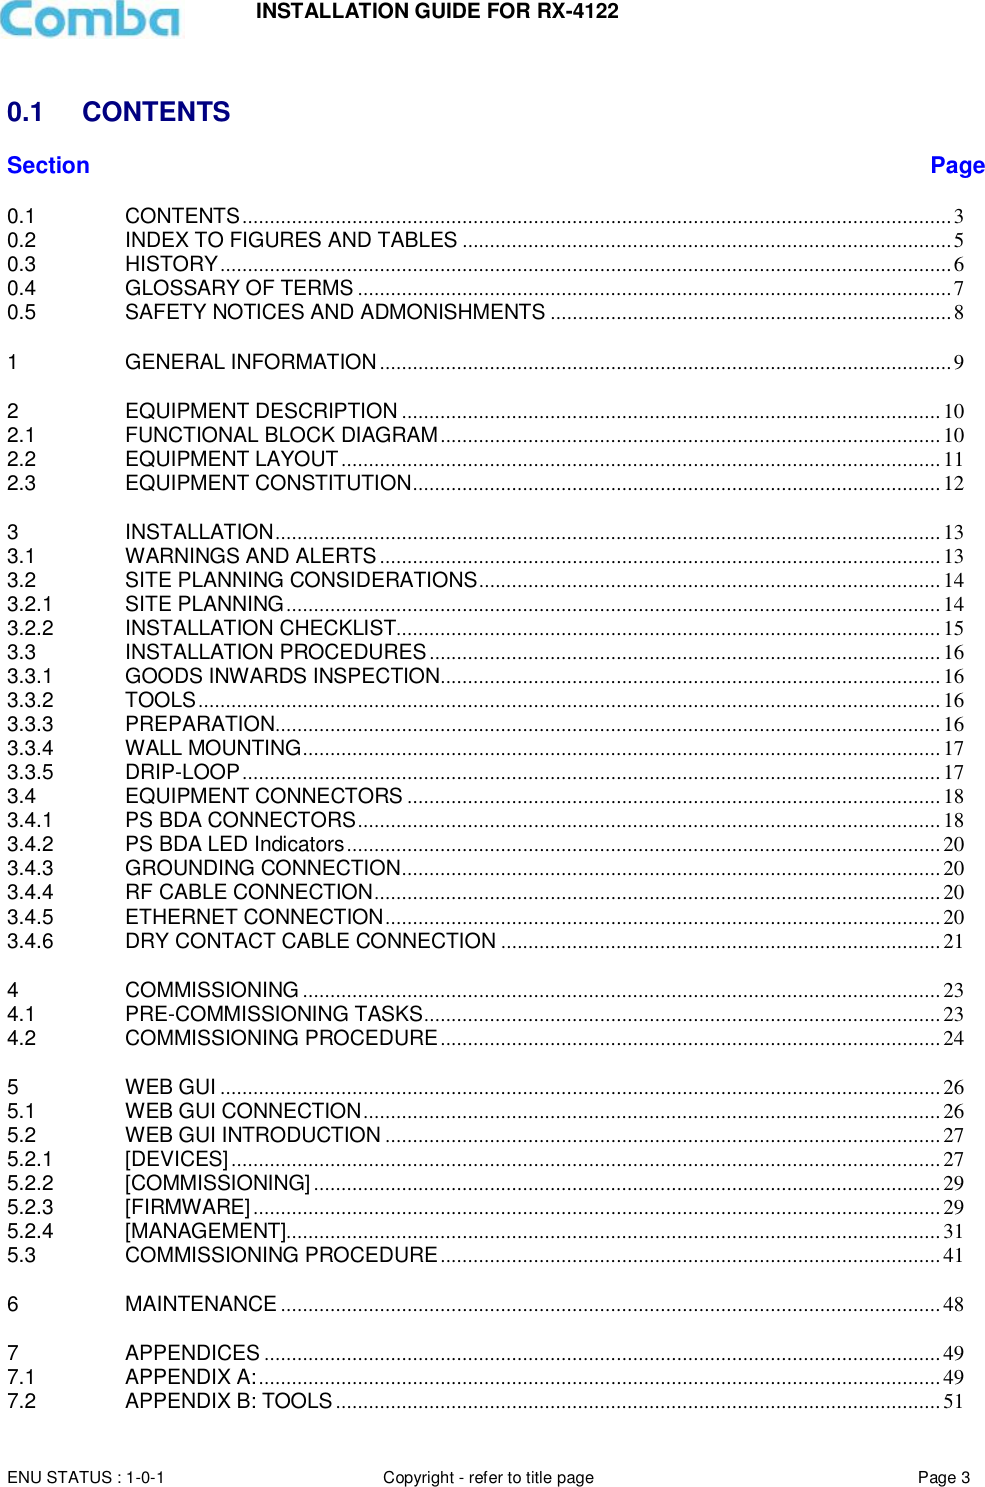 INSTALLATION GUIDE FOR RX-4122  ENU STATUS : 1-0-1 Copyright - refer to title page Page 3      0.1  CONTENTS Section Page 0.1 CONTENTS ................................................................................................................................. 3 0.2 INDEX TO FIGURES AND TABLES ......................................................................................... 5 0.3 HISTORY ..................................................................................................................................... 6 0.4 GLOSSARY OF TERMS ............................................................................................................ 7 0.5 SAFETY NOTICES AND ADMONISHMENTS ......................................................................... 8 1 GENERAL INFORMATION ........................................................................................................ 9 2 EQUIPMENT DESCRIPTION .................................................................................................. 10 2.1 FUNCTIONAL BLOCK DIAGRAM ........................................................................................... 10 2.2 EQUIPMENT LAYOUT ............................................................................................................. 11 2.3 EQUIPMENT CONSTITUTION ................................................................................................ 12 3 INSTALLATION ......................................................................................................................... 13 3.1 WARNINGS AND ALERTS ...................................................................................................... 13 3.2 SITE PLANNING CONSIDERATIONS .................................................................................... 14 3.2.1 SITE PLANNING ....................................................................................................................... 14 3.2.2 INSTALLATION CHECKLIST................................................................................................... 15 3.3 INSTALLATION PROCEDURES ............................................................................................. 16 3.3.1 GOODS INWARDS INSPECTION........................................................................................... 16 3.3.2 TOOLS ....................................................................................................................................... 16 3.3.3 PREPARATION ......................................................................................................................... 16 3.3.4 WALL MOUNTING .................................................................................................................... 17 3.3.5 DRIP-LOOP ............................................................................................................................... 17 3.4 EQUIPMENT CONNECTORS ................................................................................................. 18 3.4.1 PS BDA CONNECTORS .......................................................................................................... 18 3.4.2 PS BDA LED Indicators ............................................................................................................ 20 3.4.3 GROUNDING CONNECTION .................................................................................................. 20 3.4.4 RF CABLE CONNECTION ....................................................................................................... 20 3.4.5 ETHERNET CONNECTION ..................................................................................................... 20 3.4.6 DRY CONTACT CABLE CONNECTION ................................................................................ 21 4 COMMISSIONING .................................................................................................................... 23 4.1 PRE-COMMISSIONING TASKS .............................................................................................. 23 4.2 COMMISSIONING PROCEDURE ........................................................................................... 24 5 WEB GUI ................................................................................................................................... 26 5.1 WEB GUI CONNECTION ......................................................................................................... 26 5.2 WEB GUI INTRODUCTION ..................................................................................................... 27 5.2.1 [DEVICES] ................................................................................................................................. 27 5.2.2 [COMMISSIONING] .................................................................................................................. 29 5.2.3 [FIRMWARE] ............................................................................................................................. 29 5.2.4 [MANAGEMENT]....................................................................................................................... 31 5.3 COMMISSIONING PROCEDURE ........................................................................................... 41 6 MAINTENANCE ........................................................................................................................ 48 7 APPENDICES ........................................................................................................................... 49 7.1 APPENDIX A: ............................................................................................................................ 49 7.2 APPENDIX B: TOOLS .............................................................................................................. 51 